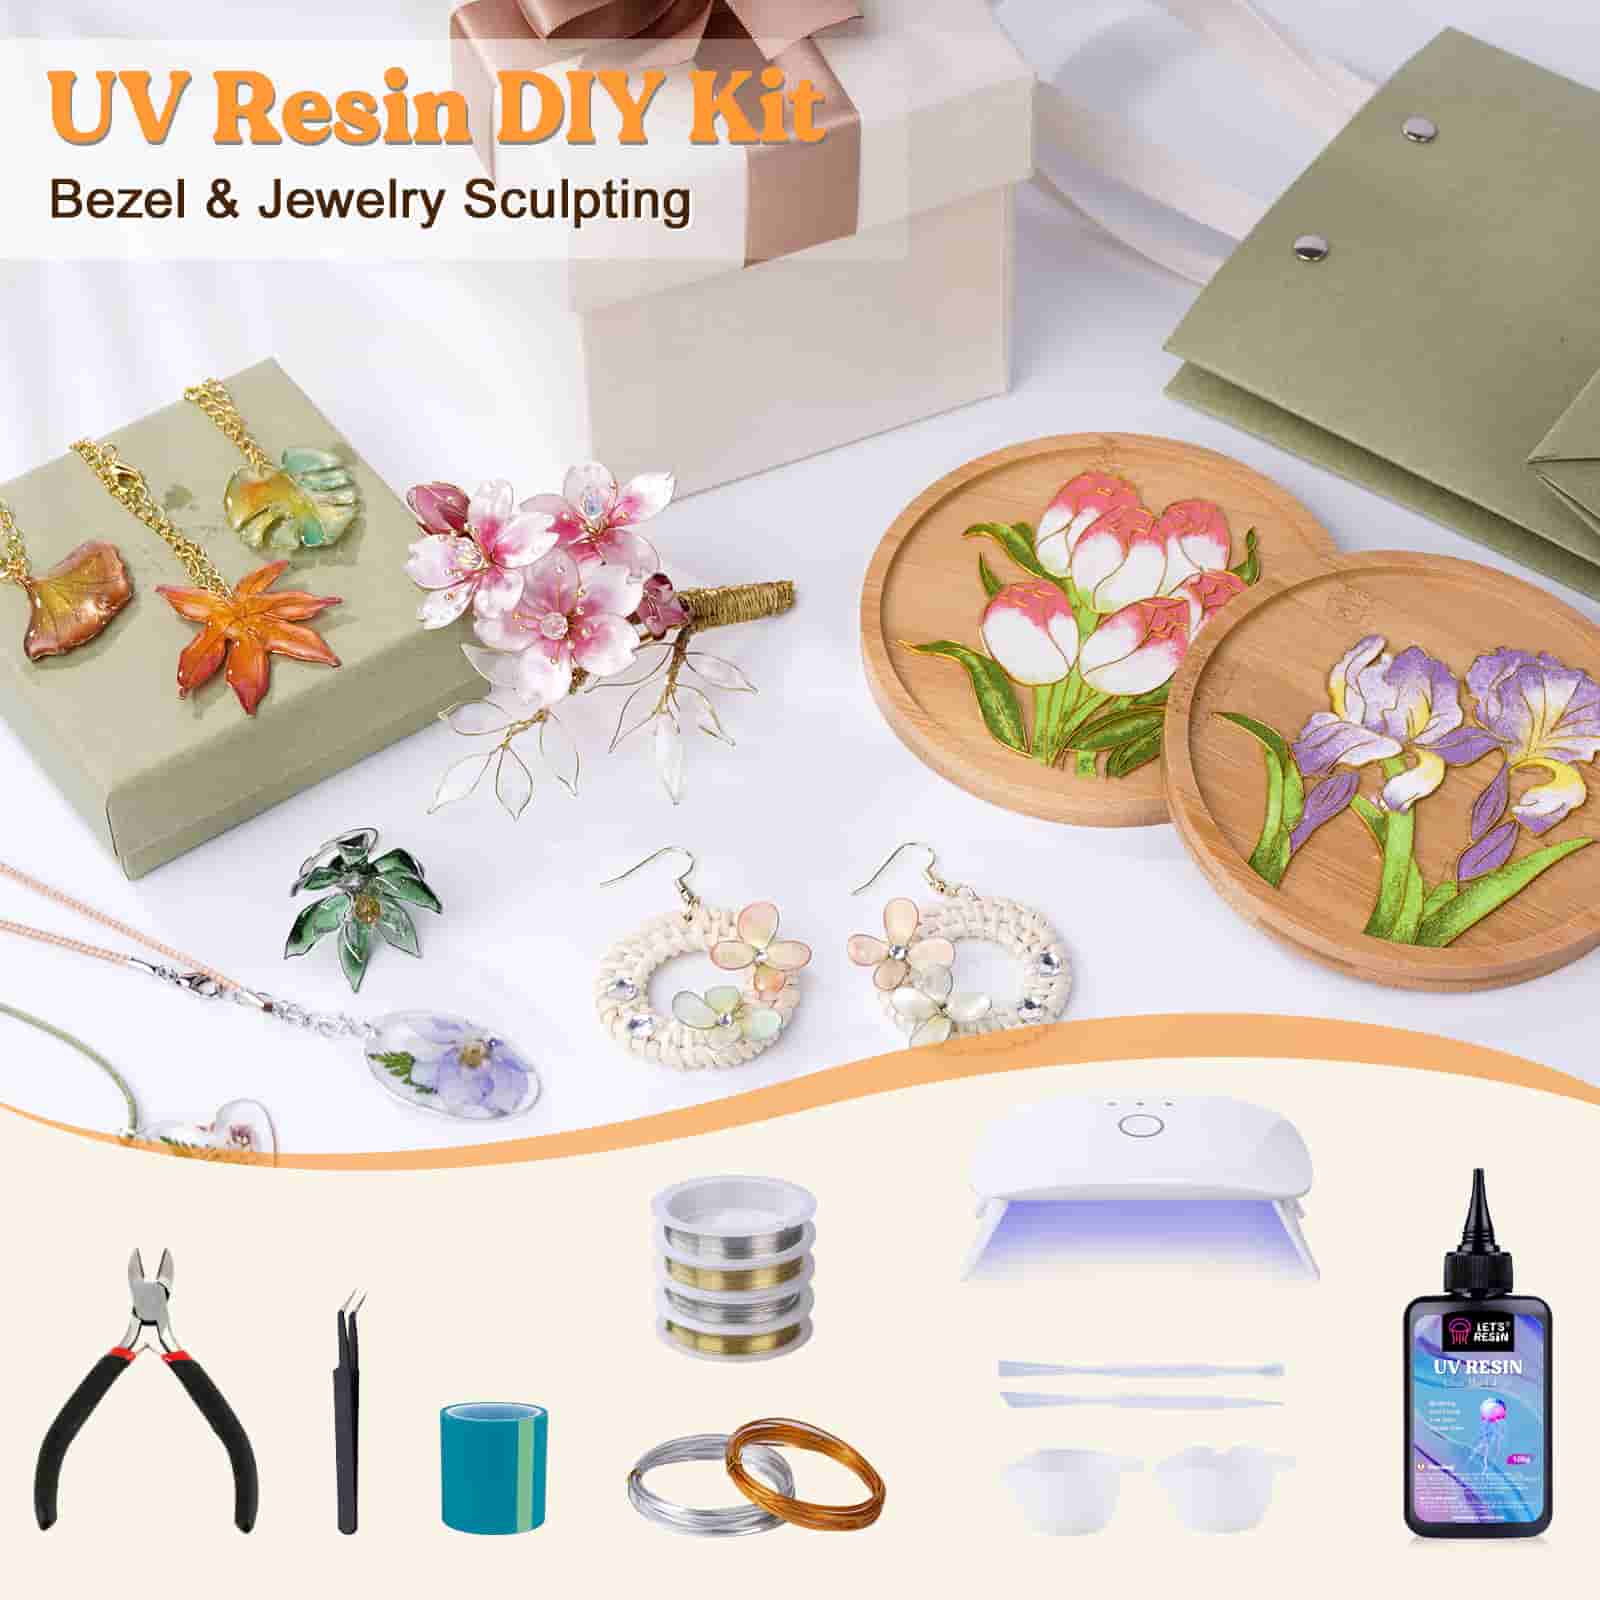  LET'S RESIN Resin Kit for Beginners,30oz Resin Starter Kit with  Coaster Molds,Silicone Sphere Molds Set, Dried Flowers, Foil Flakes,Resin  Cups,Resin Craft Kit for Casting : Arts, Crafts & Sewing